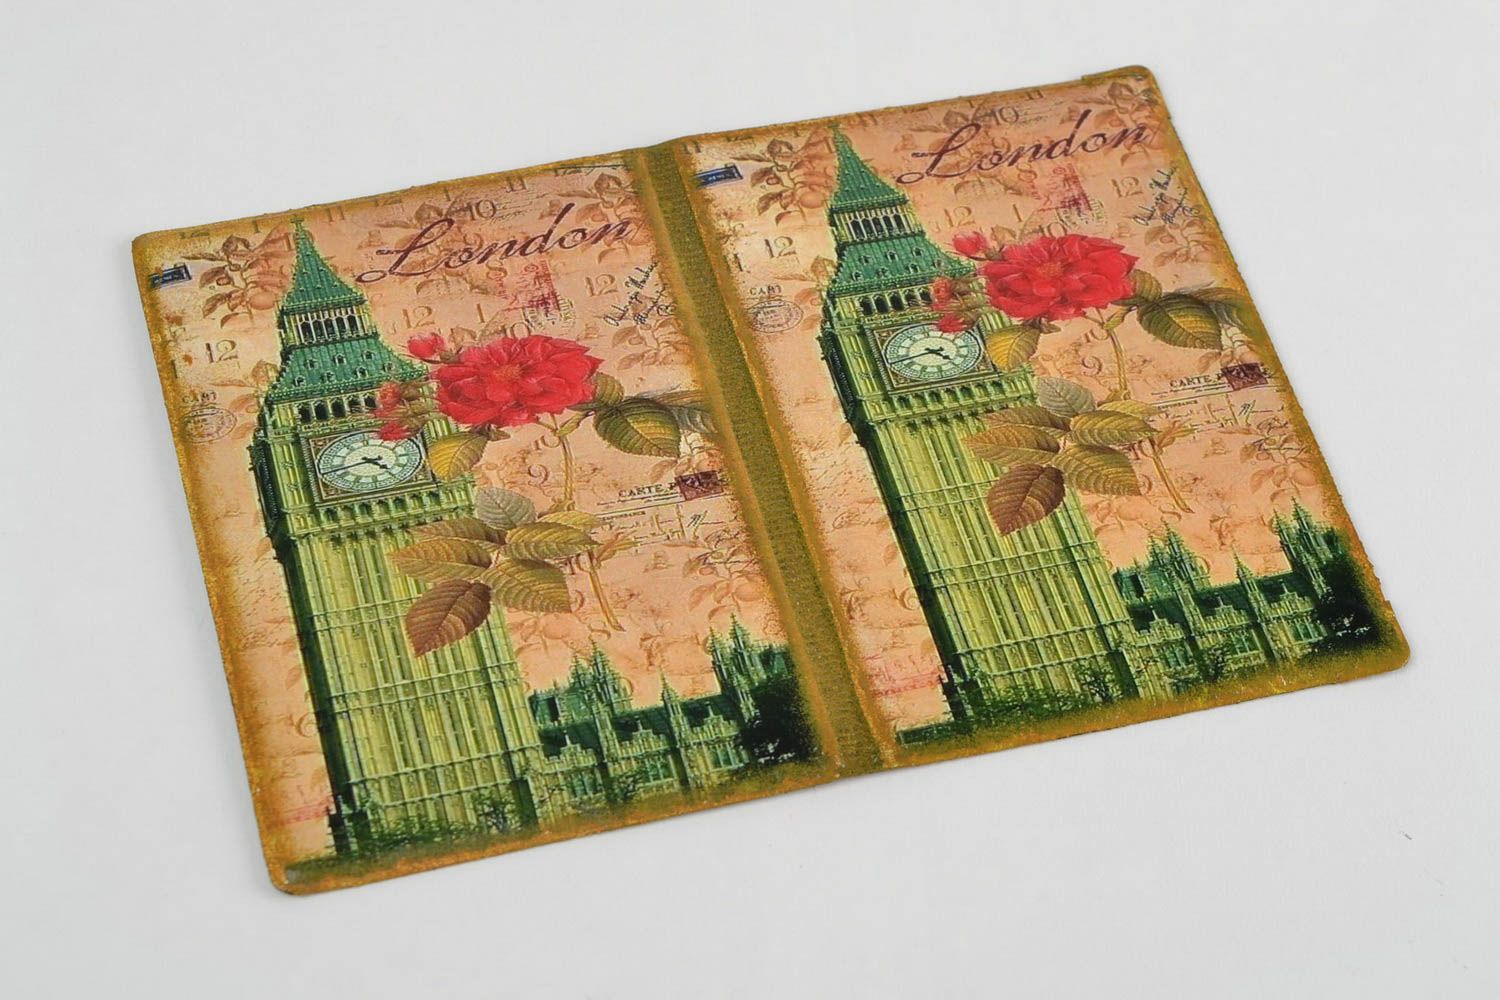 Handmade faux leather passport cover with decoupage image of Big Ben and rose photo 3